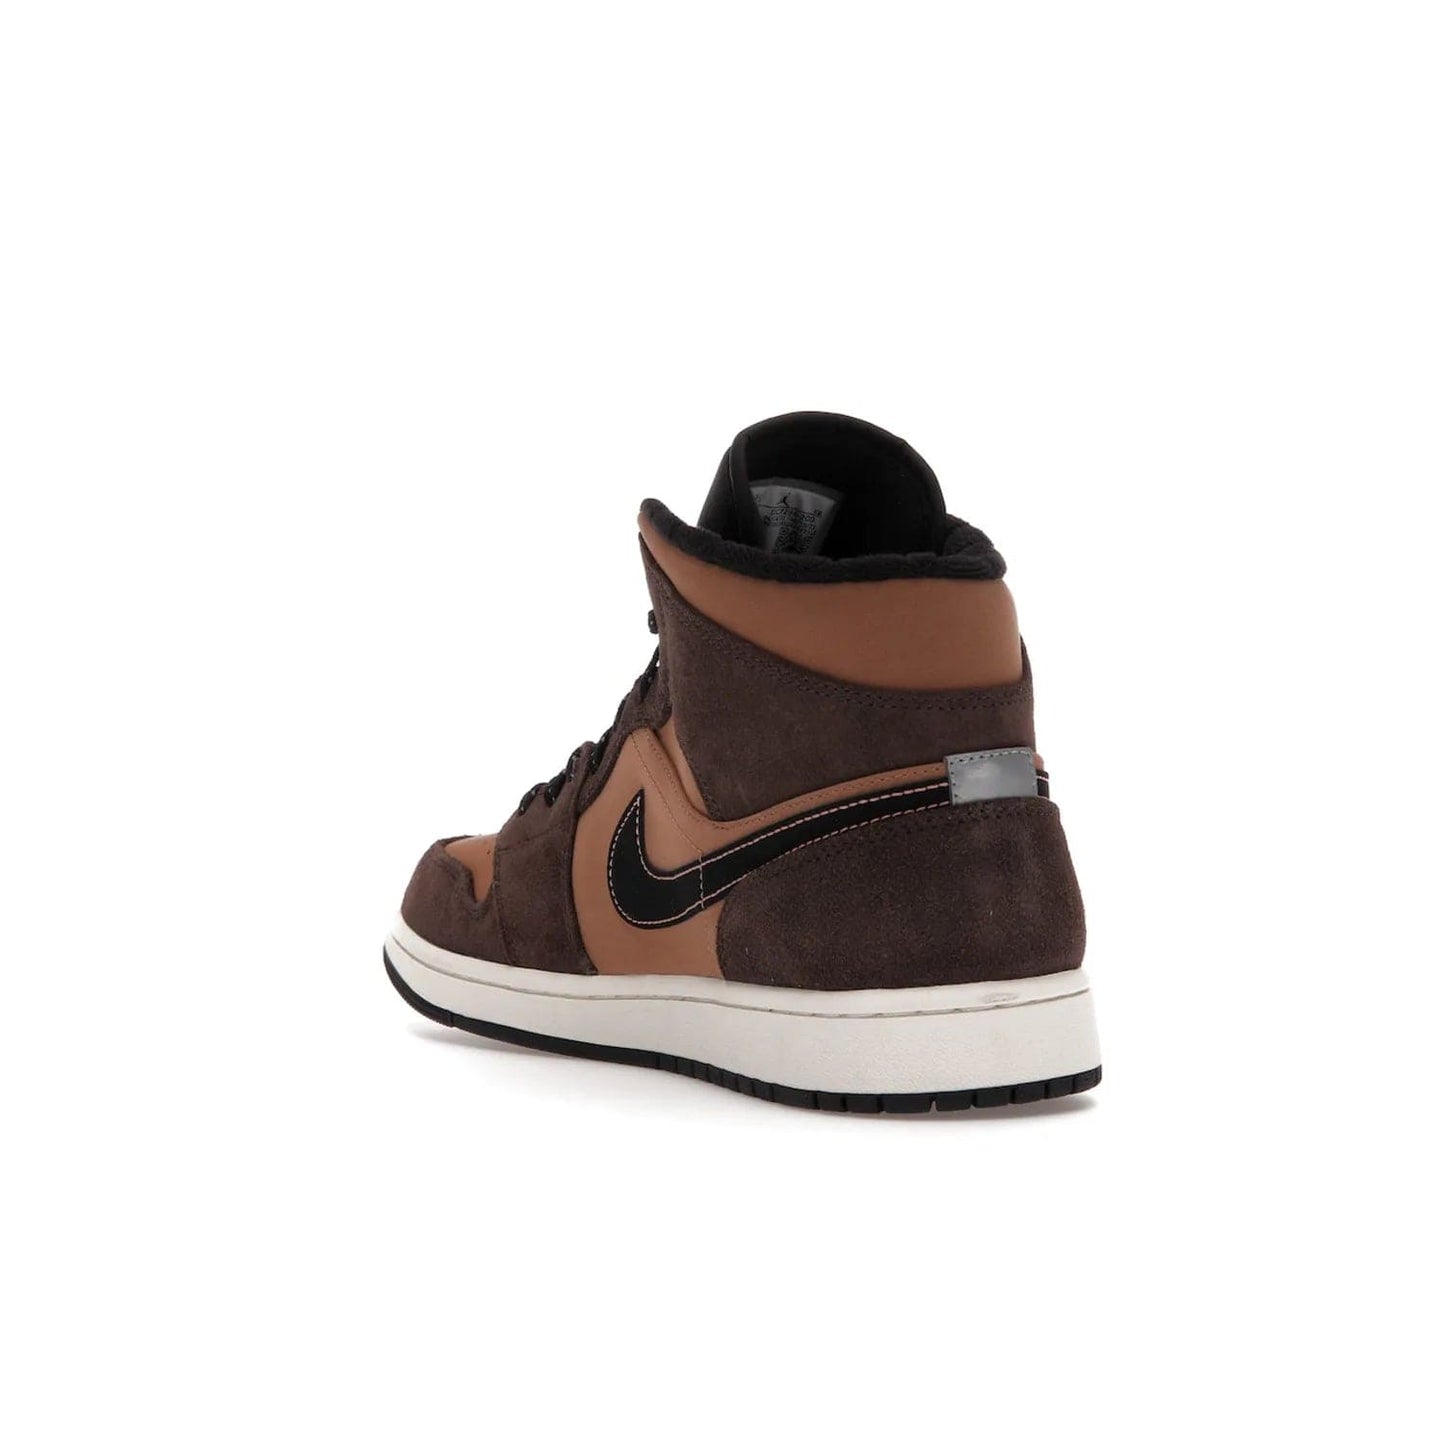 Jordan 1 Mid SE Dark Chocolate - Image 25 - Only at www.BallersClubKickz.com - This fashionable and functional Jordan 1 Mid SE Dark Chocolate features a light brown Durabuck upper, dark brown suede overlays, black Swoosh logos and reflective patch at heel. A must-have for any sneakerhead!